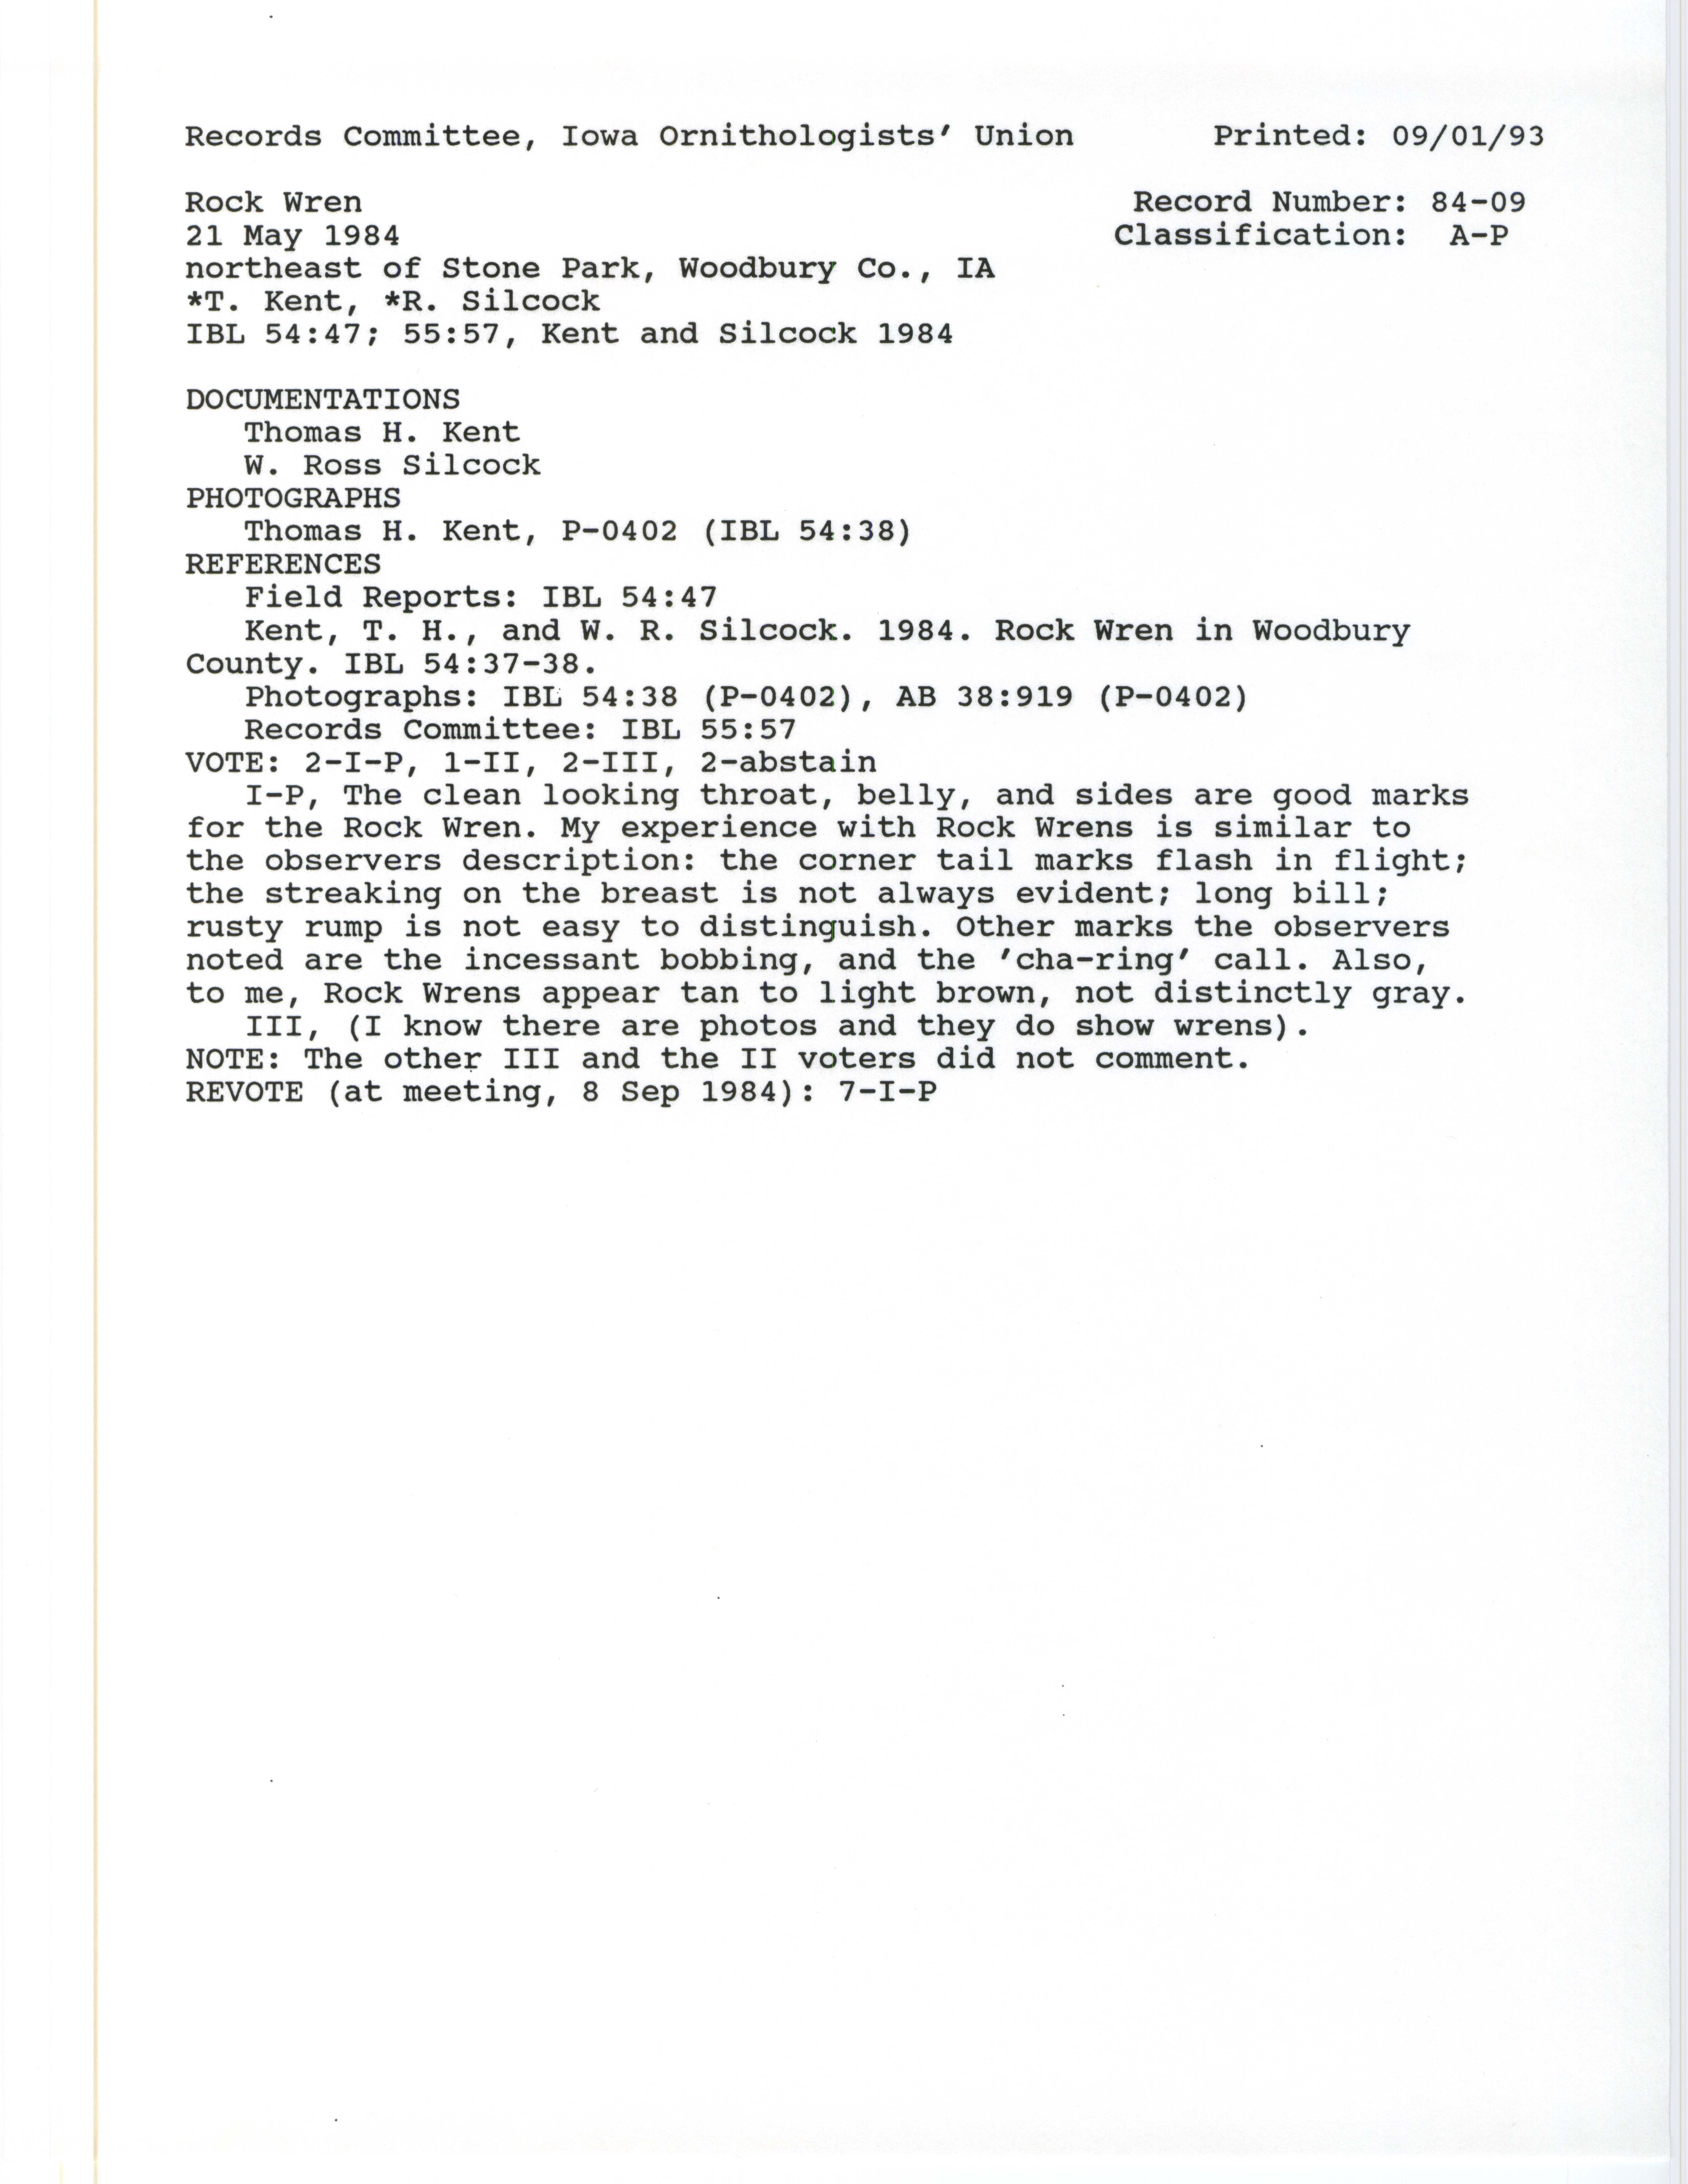 Records Committee review for rare bird sighting for Rock Wren north of Stone State Park, 1984